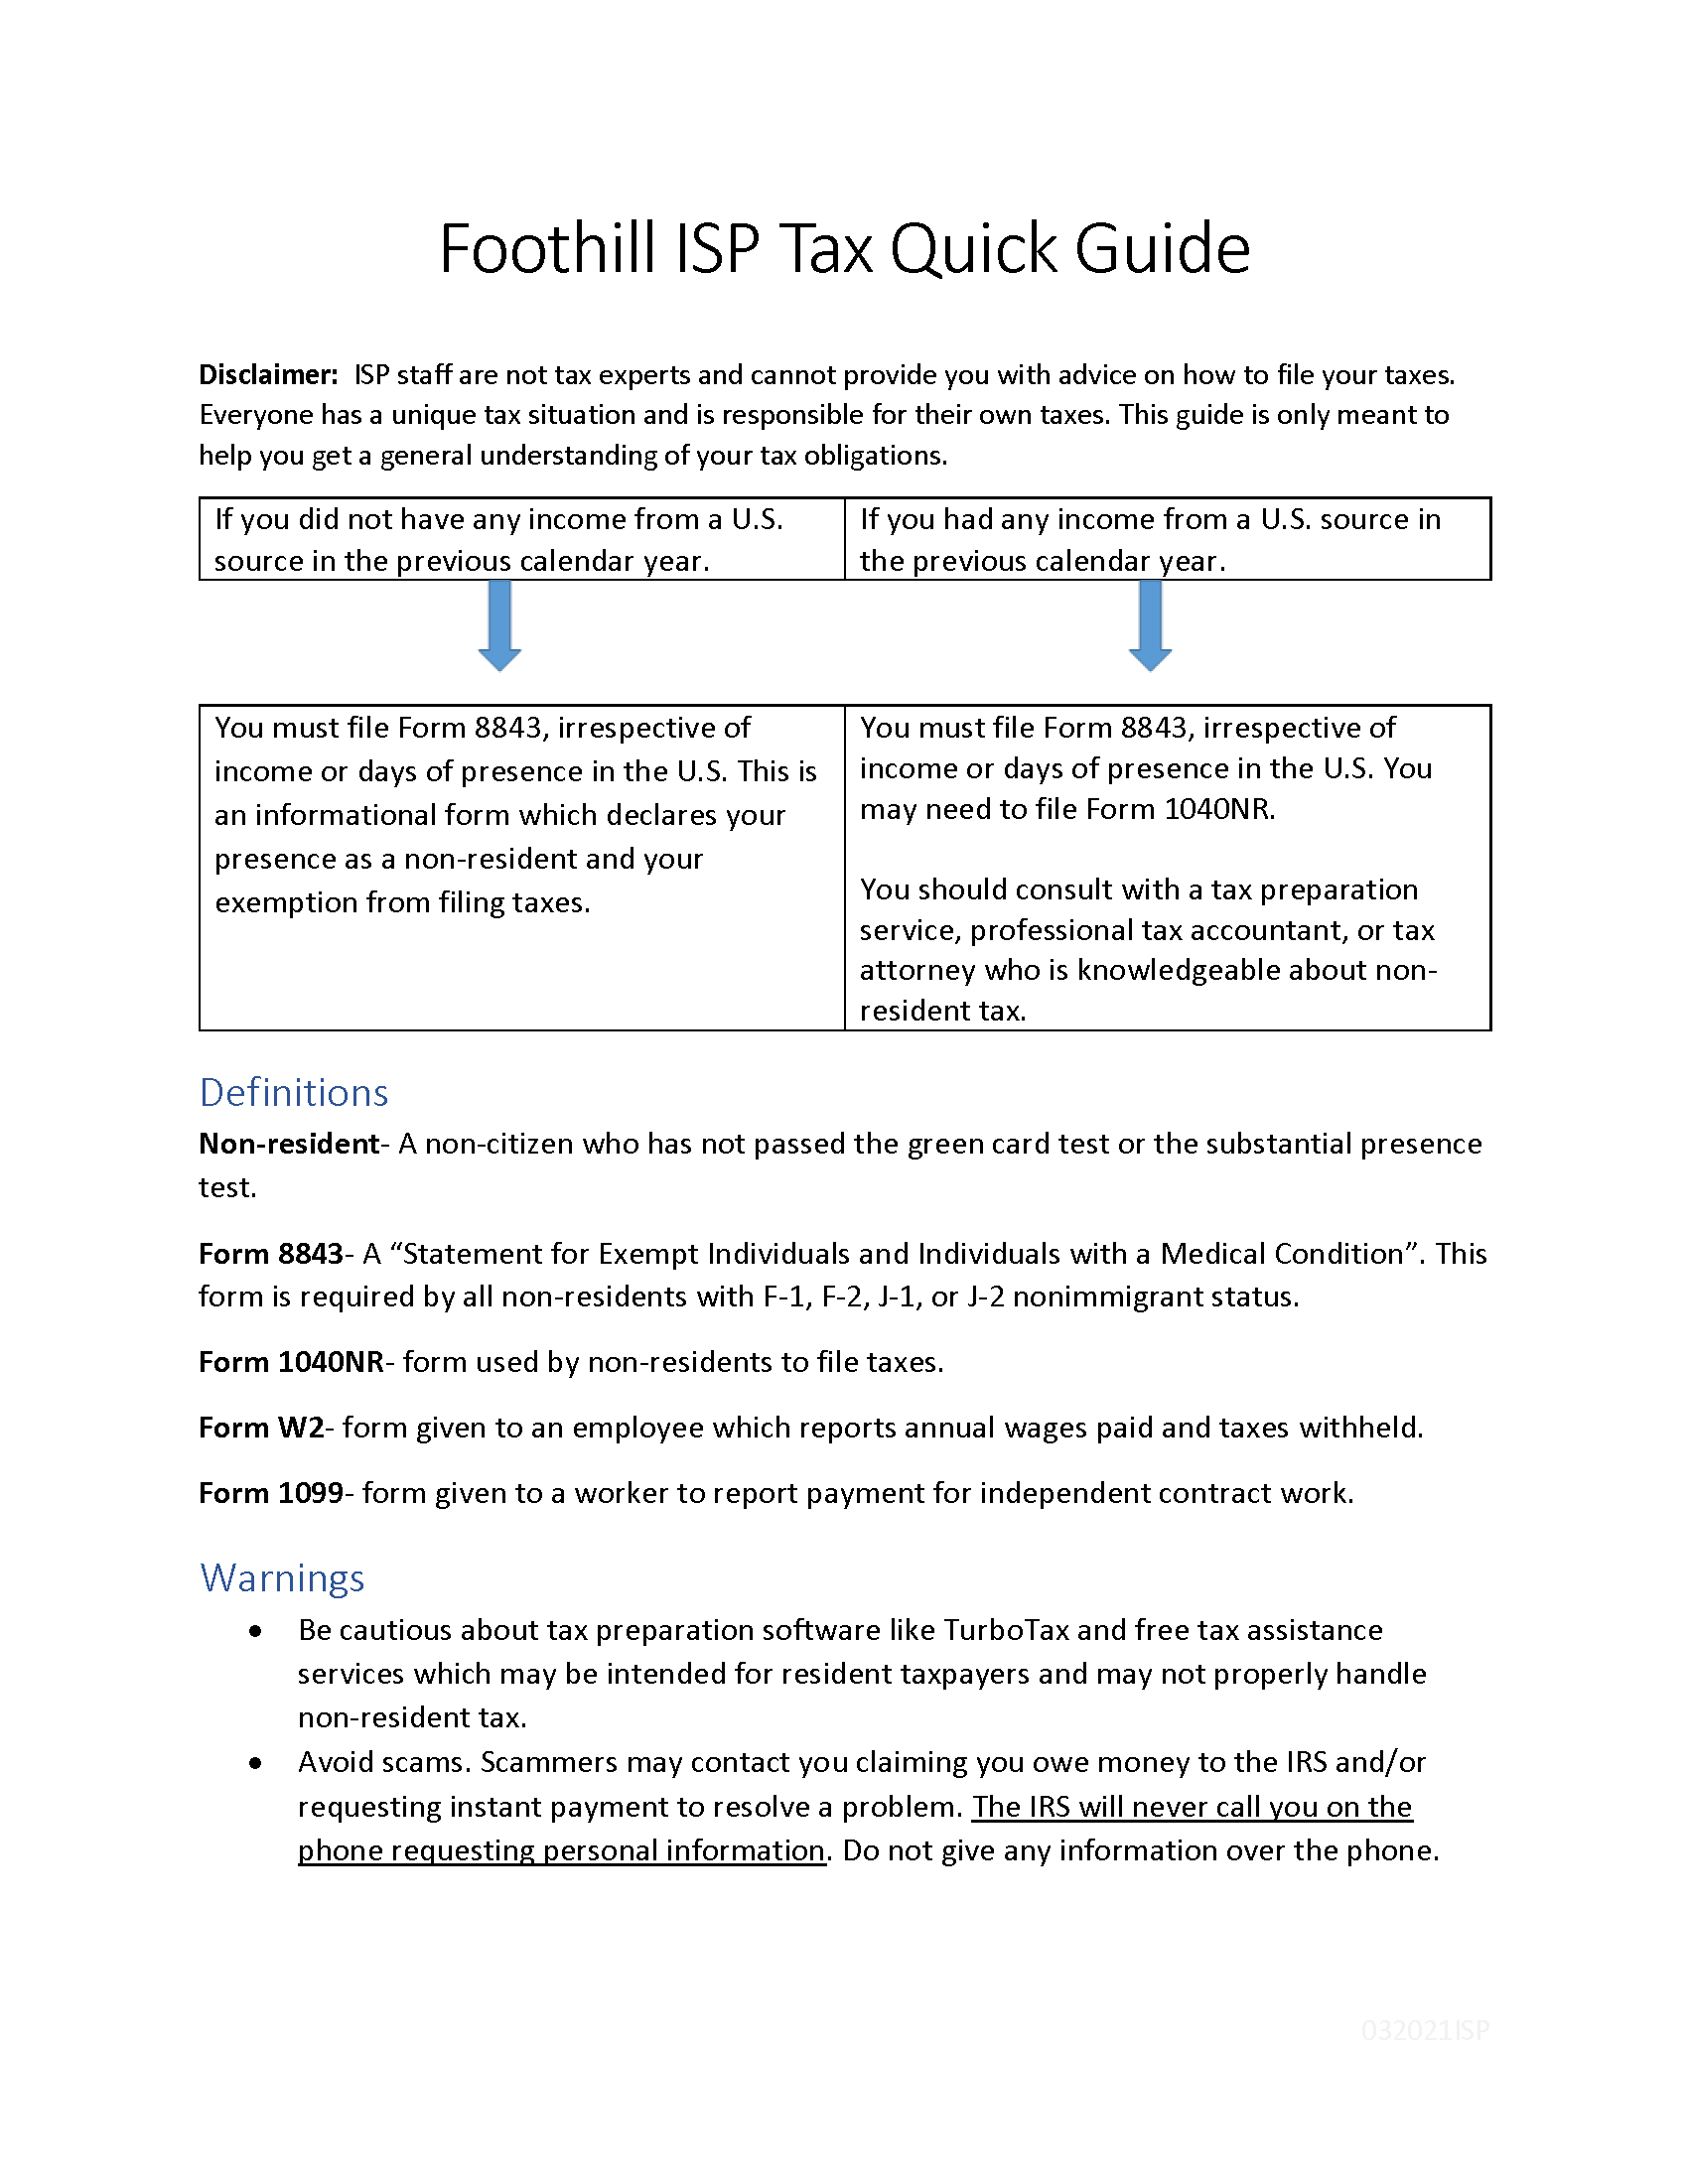 Foothill ISP Quick Tax Guide 1